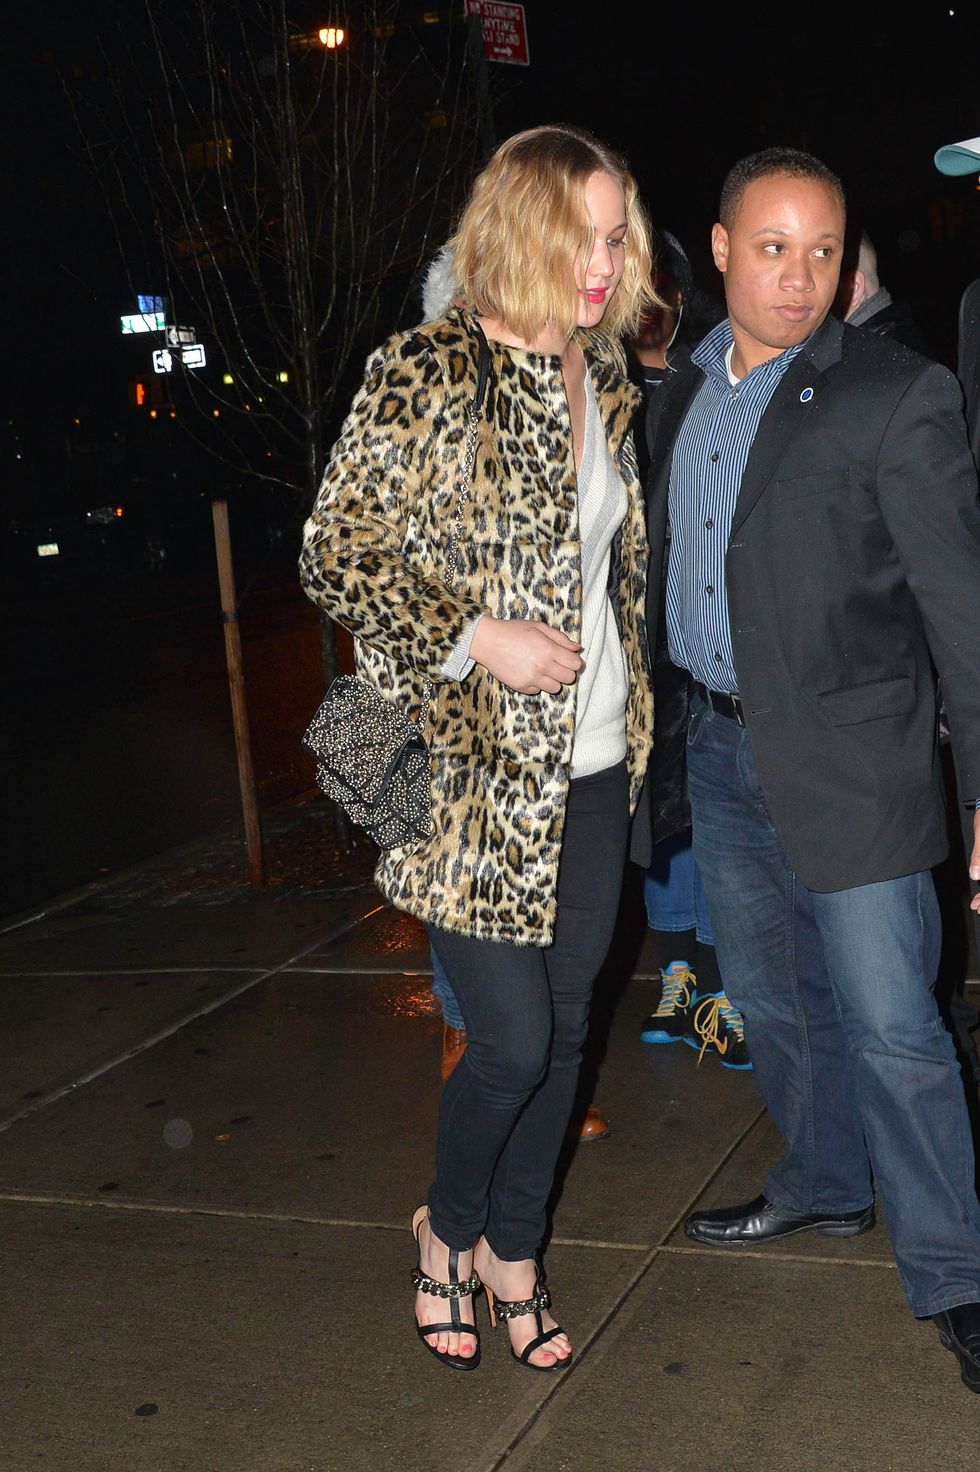 Jennifer Lawrence in New York wearing a leopard print jacket and jeans